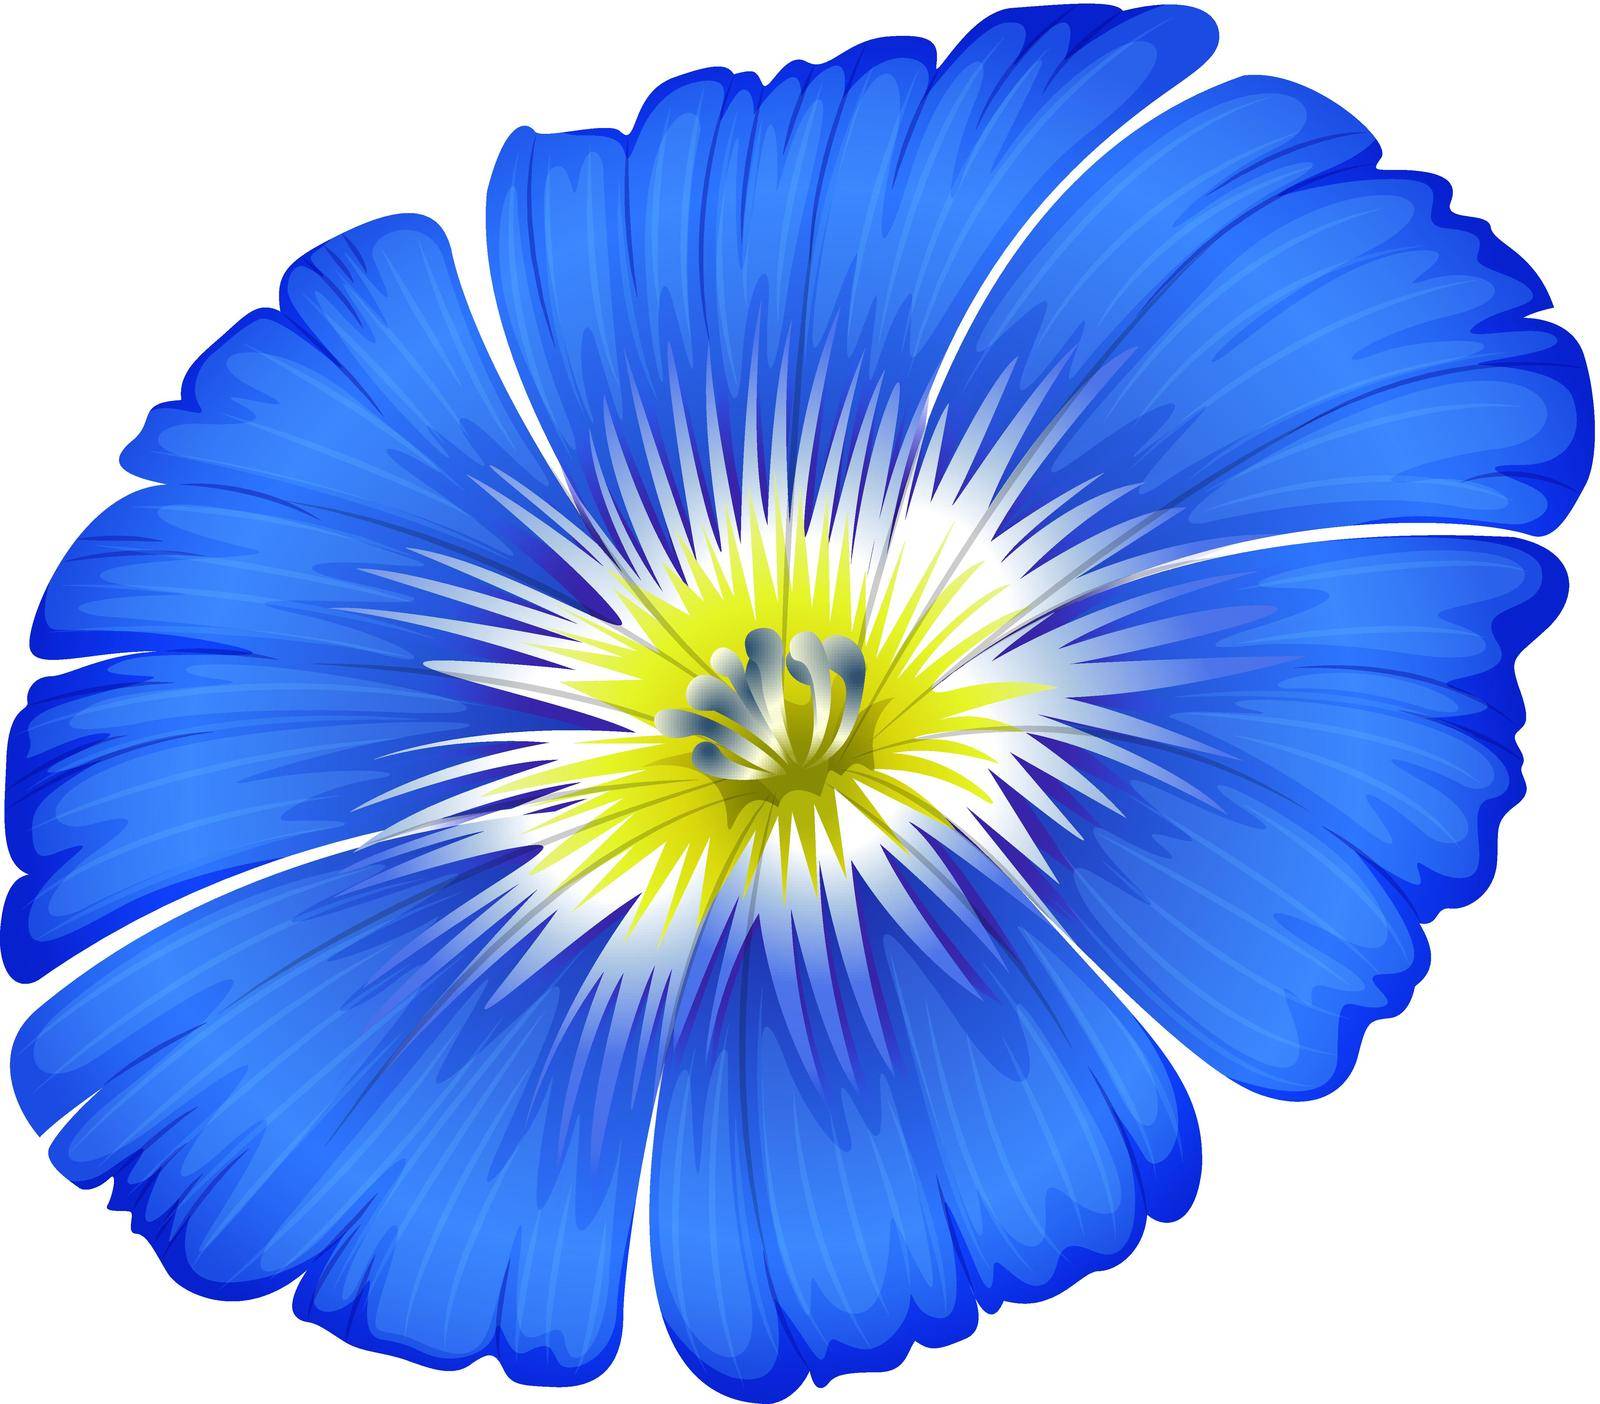 Illustration of a blue blooming flower on a white background